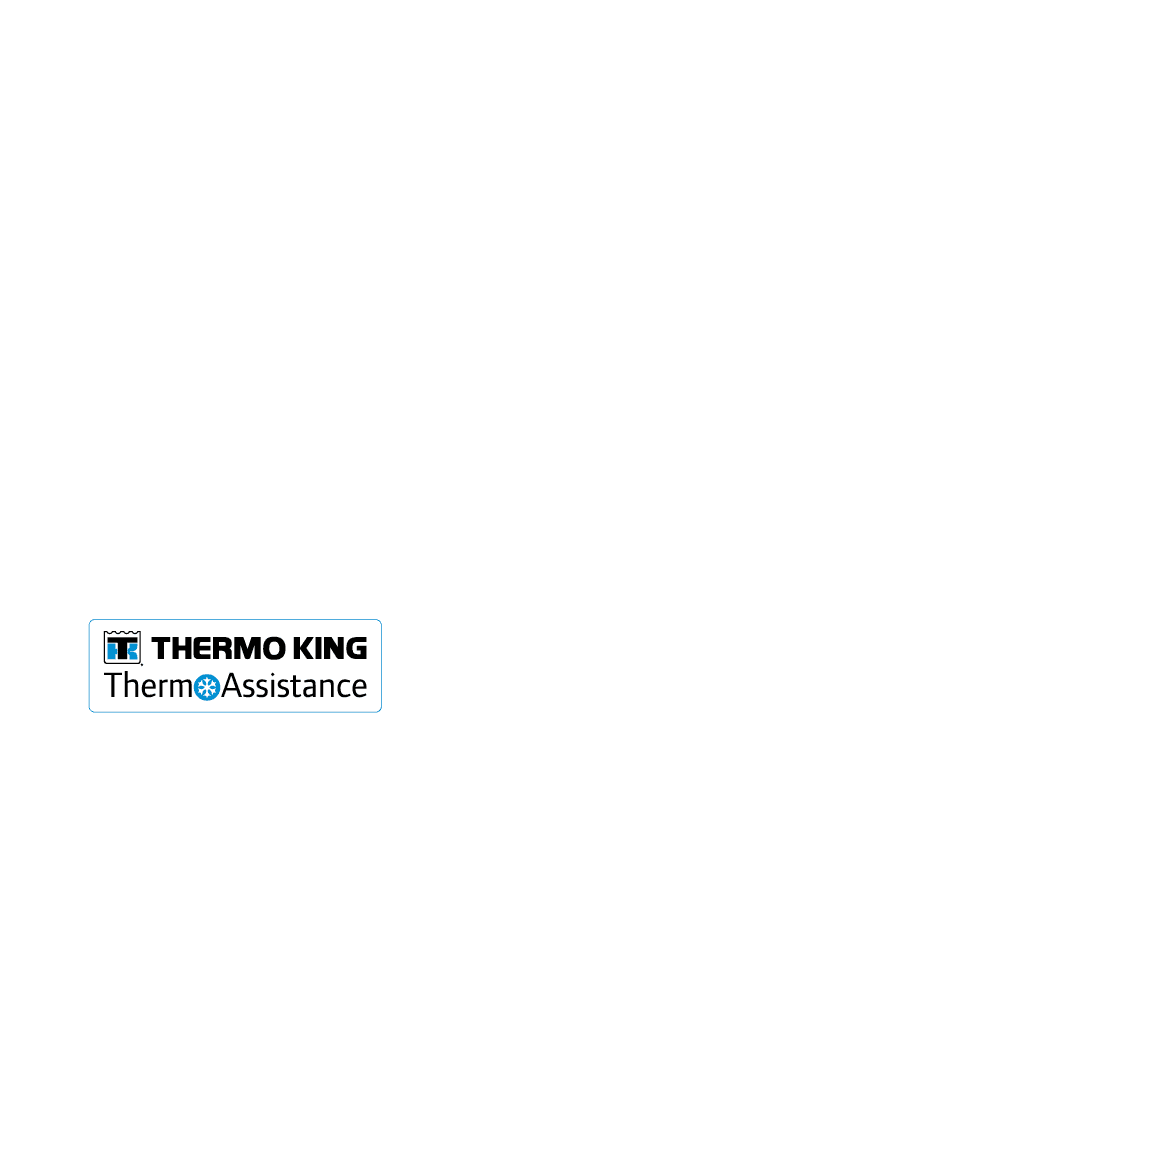 ThermoKare is a complete selection of service contract solutions designed to optimise fleet efficiency, minimise oper...